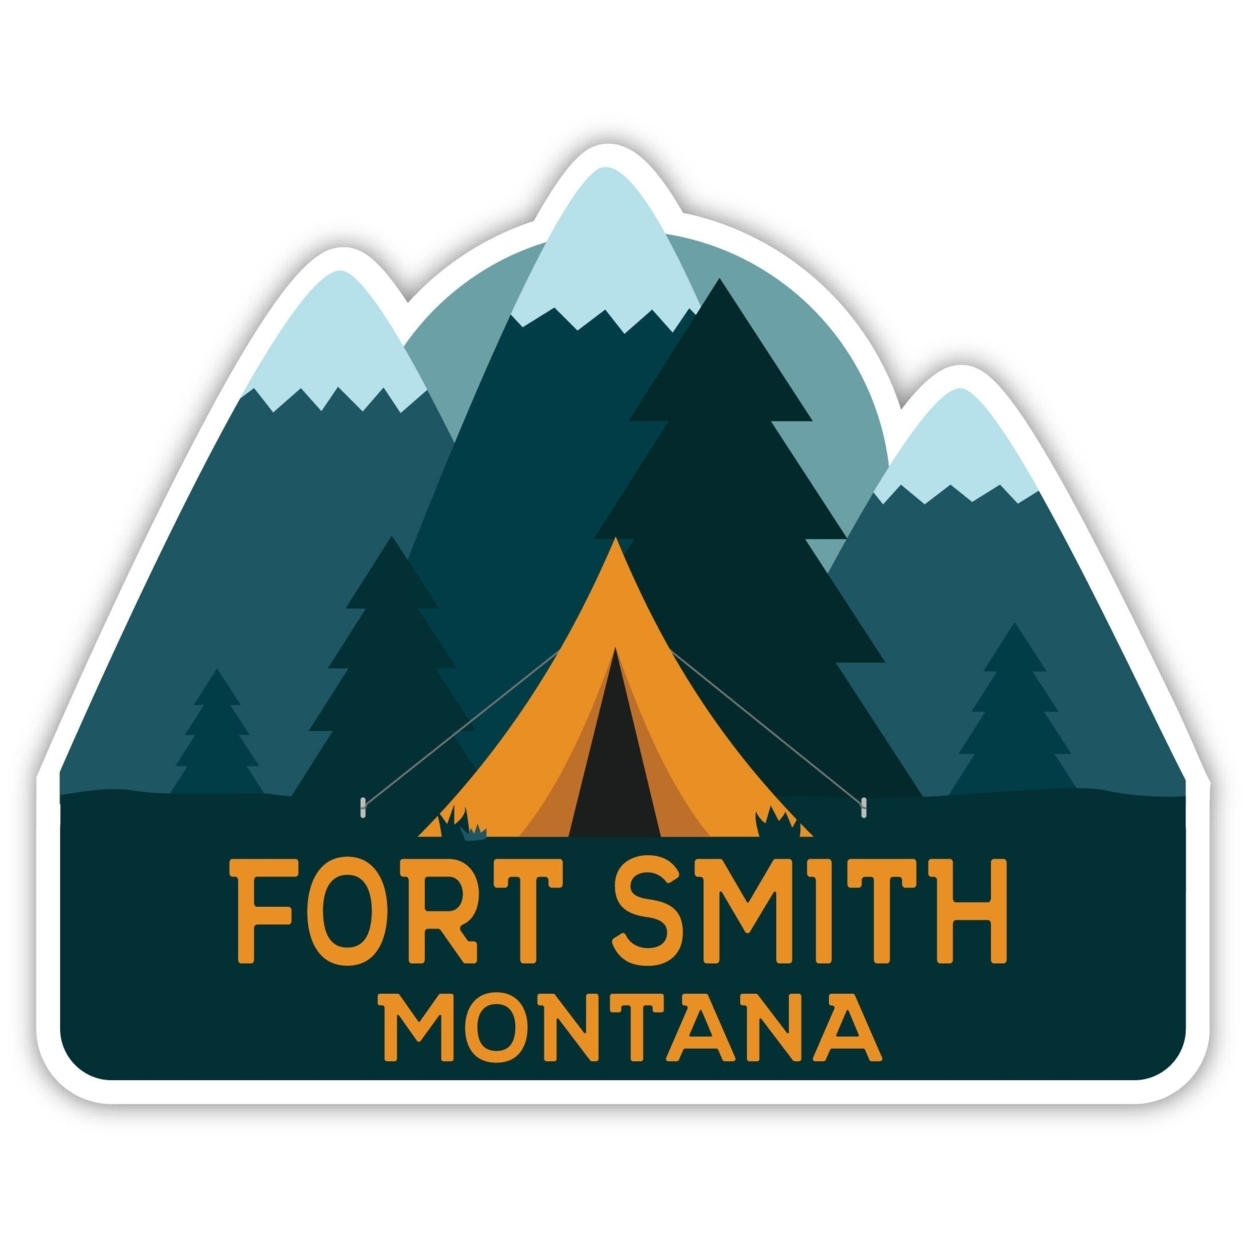 Fort Smith Montana Souvenir Decorative Stickers (Choose Theme And Size) - 4-Pack, 6-Inch, Bear